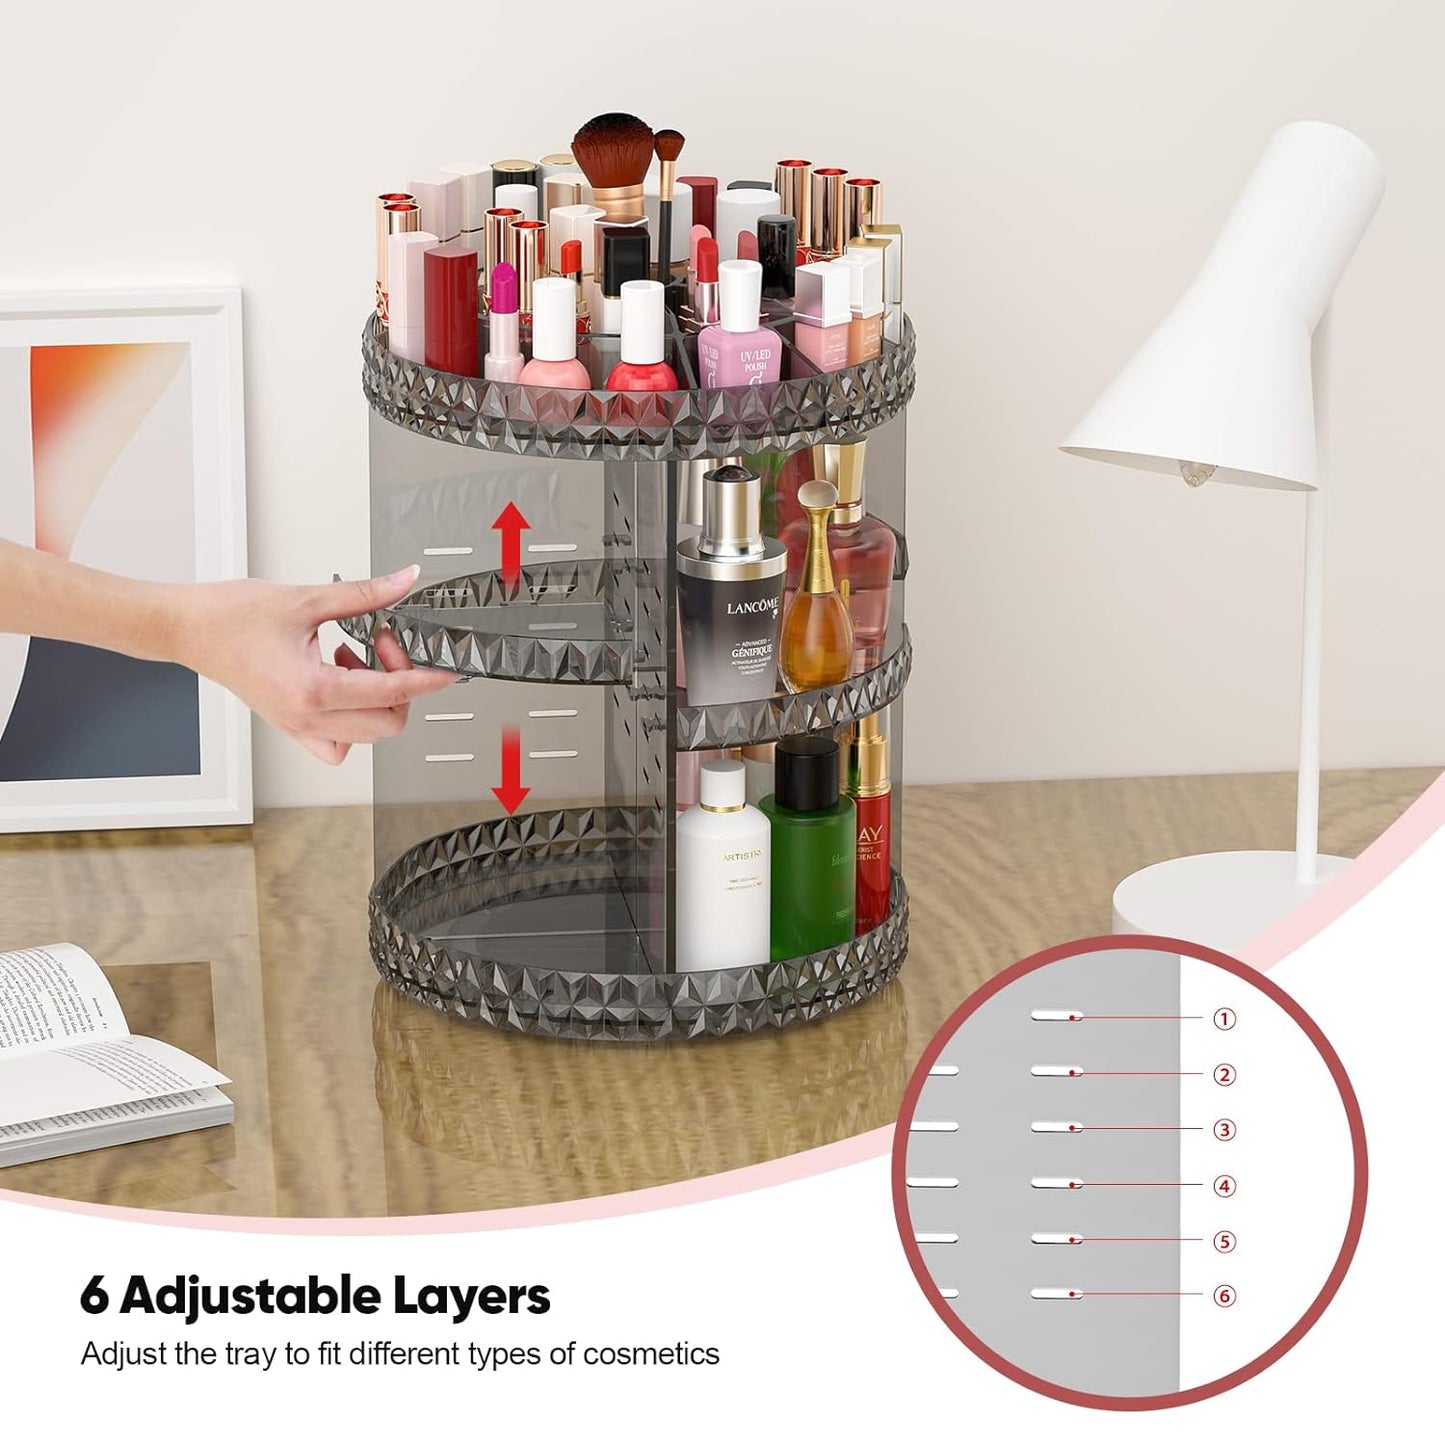 Expansive Storage: Our makeup organizer offers generous space for your cosmetics. With room for skincare products, lipsticks, perfumes, Eyebrow Pens, and makeup brushes, this ingenious design optimizes your storage, ensuring your cosmetics are neatly organized and easily accessible.